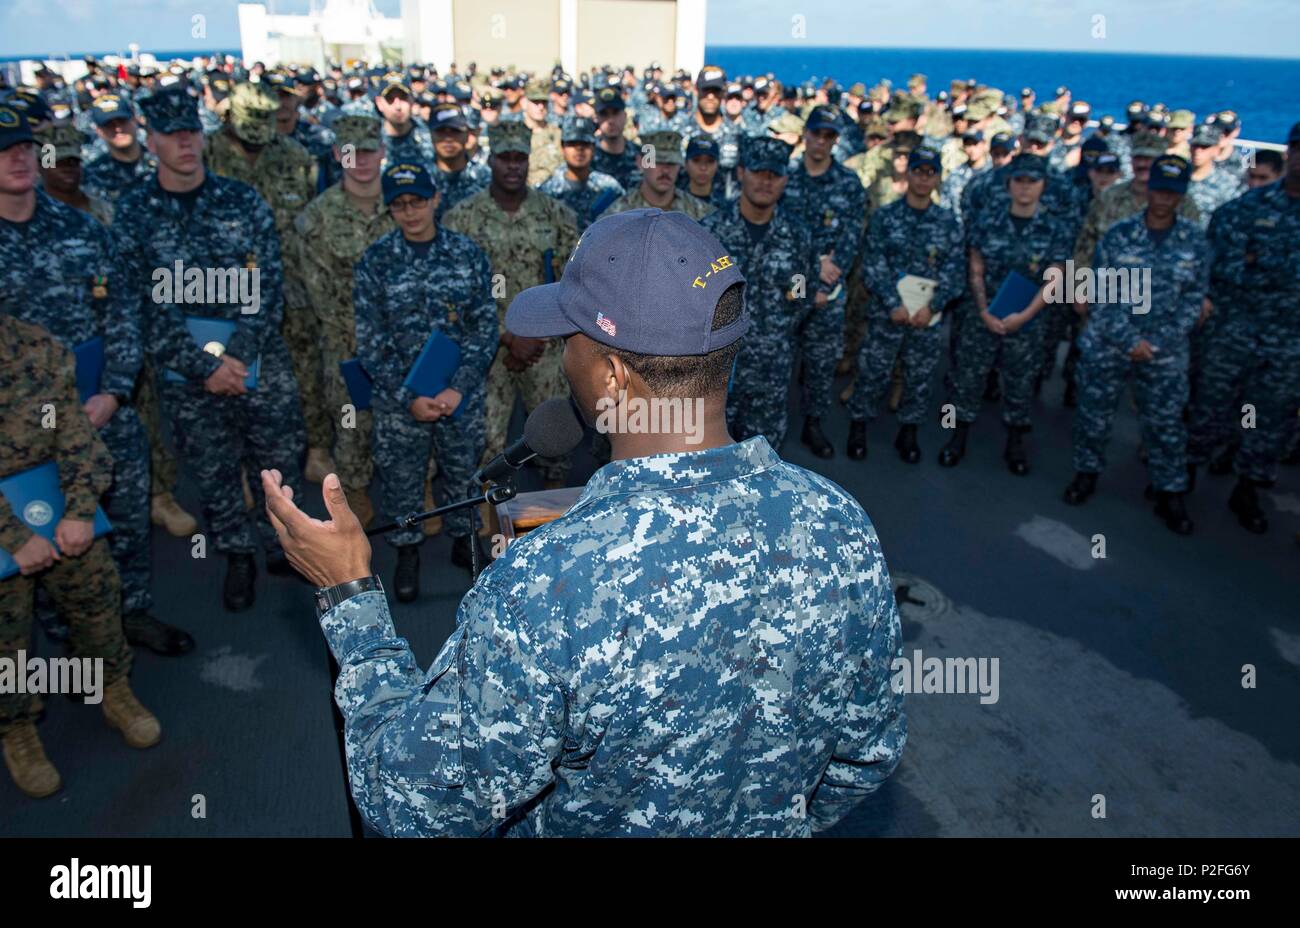 160917-N-QW941-214 PACIFIC OCEAN (Sept. 17, 2016) Medical Treatment Facility, USNS Mercy (T-AH 19), Command Master Chief Dedrick Walker, from England, Arkansas, addresses the crew after an awards ceremony on the flight deck. Deployed in support of Pacific Partnership 2016, Mercy is sailing to her homeport of San Diego. (U.S. Navy photo by Mass Communication Specialist 3rd Class Trevor Kohlrus/Released) Stock Photo